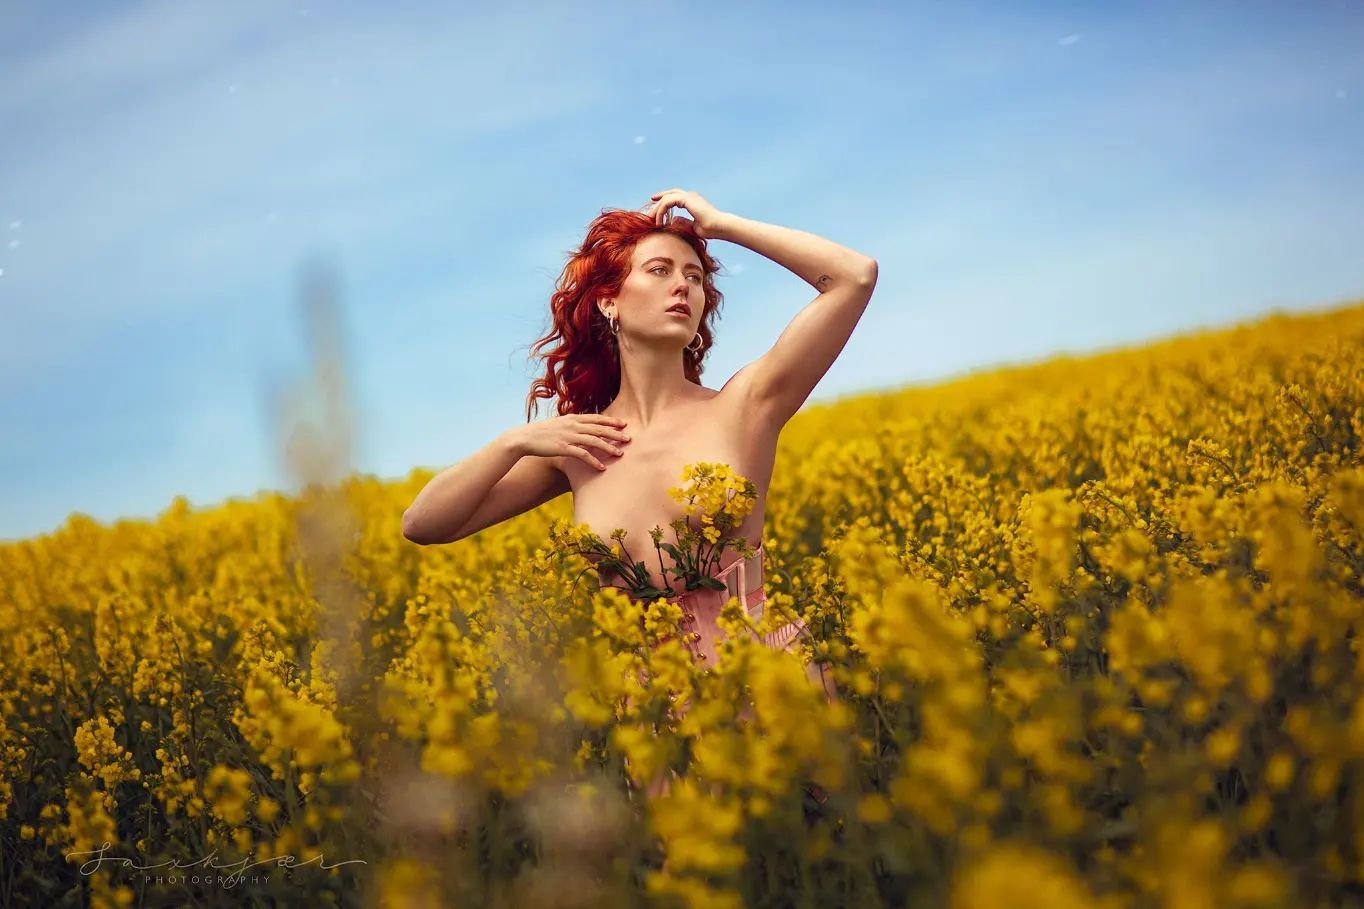 The rapeseed fields have started blooming, so sharing a picture from last year, shot by the amazingly talented @saxkjaer_photography

Who would have thought that it would take me 11 years of modeling before my first time shooting in a rapeseed field?